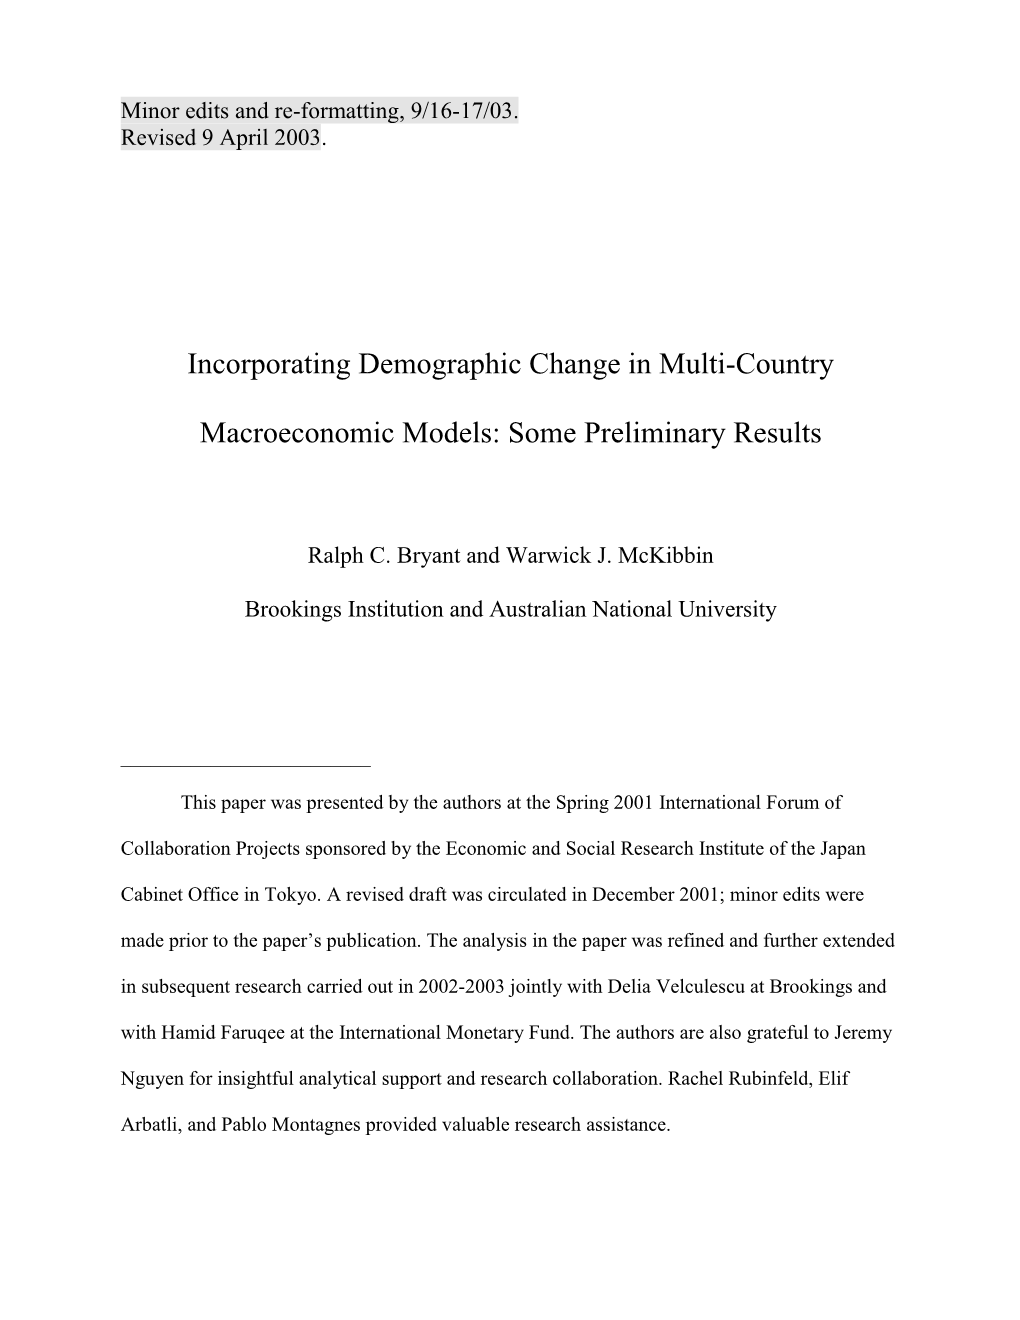 Incorporating Demographic Change in Multi-Country Macroeconomic Models